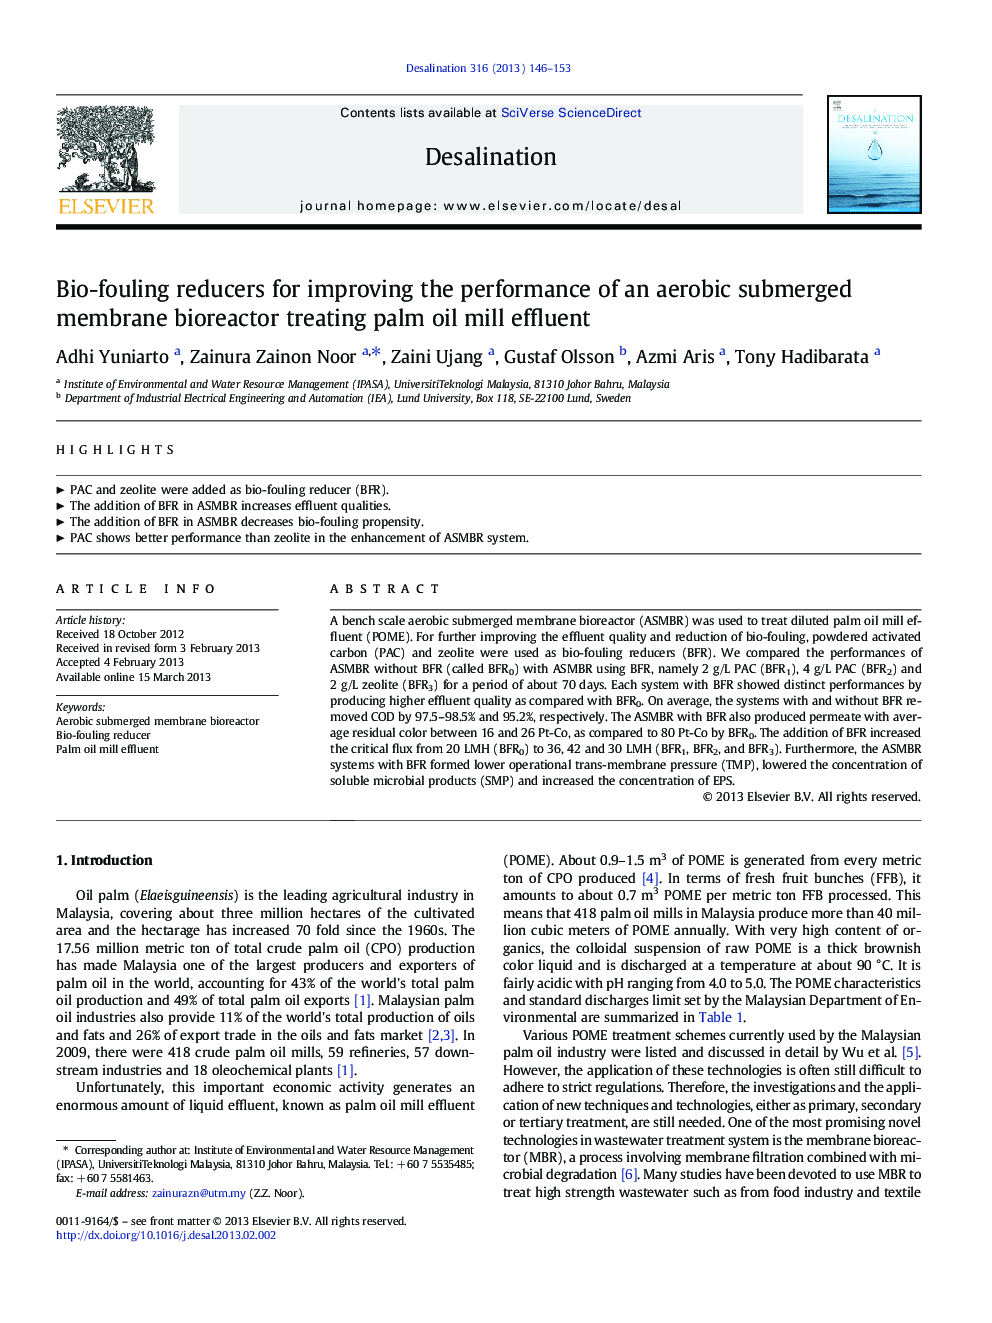 Bio-fouling reducers for improving the performance of an aerobic submerged membrane bioreactor treating palm oil mill effluent